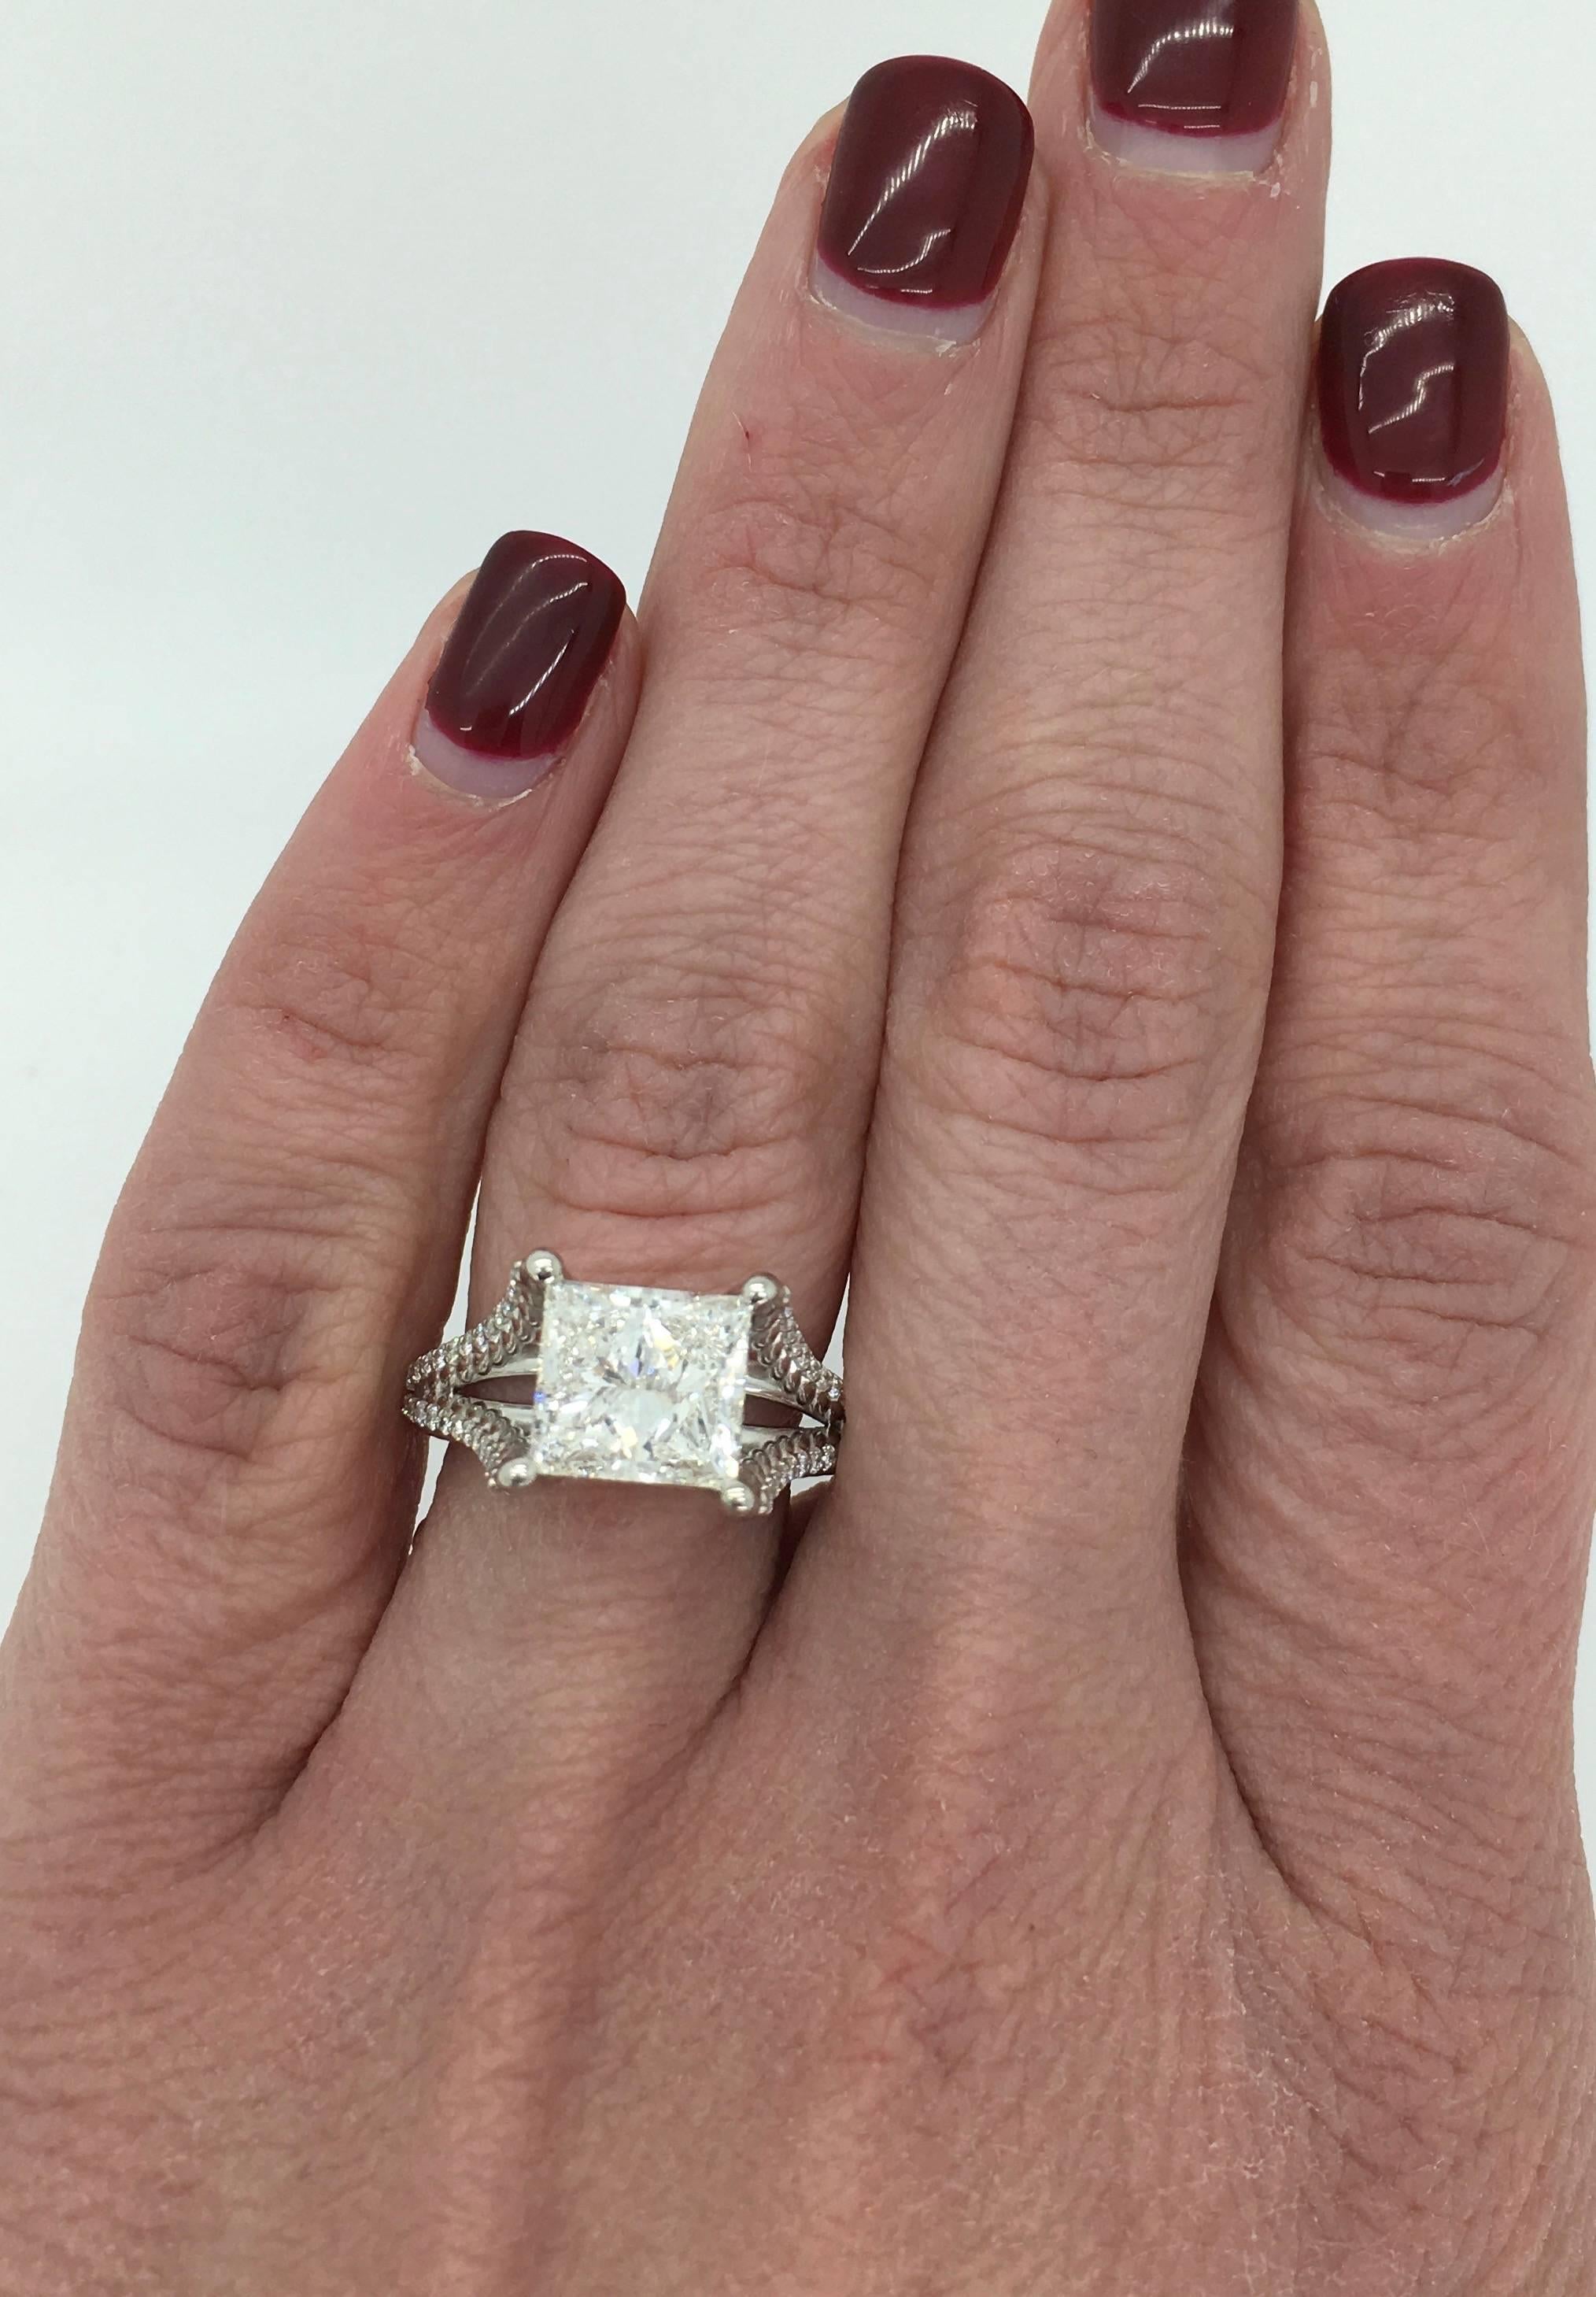 This gorgeous ring features a large GIA certified 3.00CT Princess Cut Diamond. The diamond has I color and SI2 clarity. It is accented by 48 Round Brilliant Cut Diamonds. The total diamond weight is approximately 3.25CTW. The 14K white gold ring is